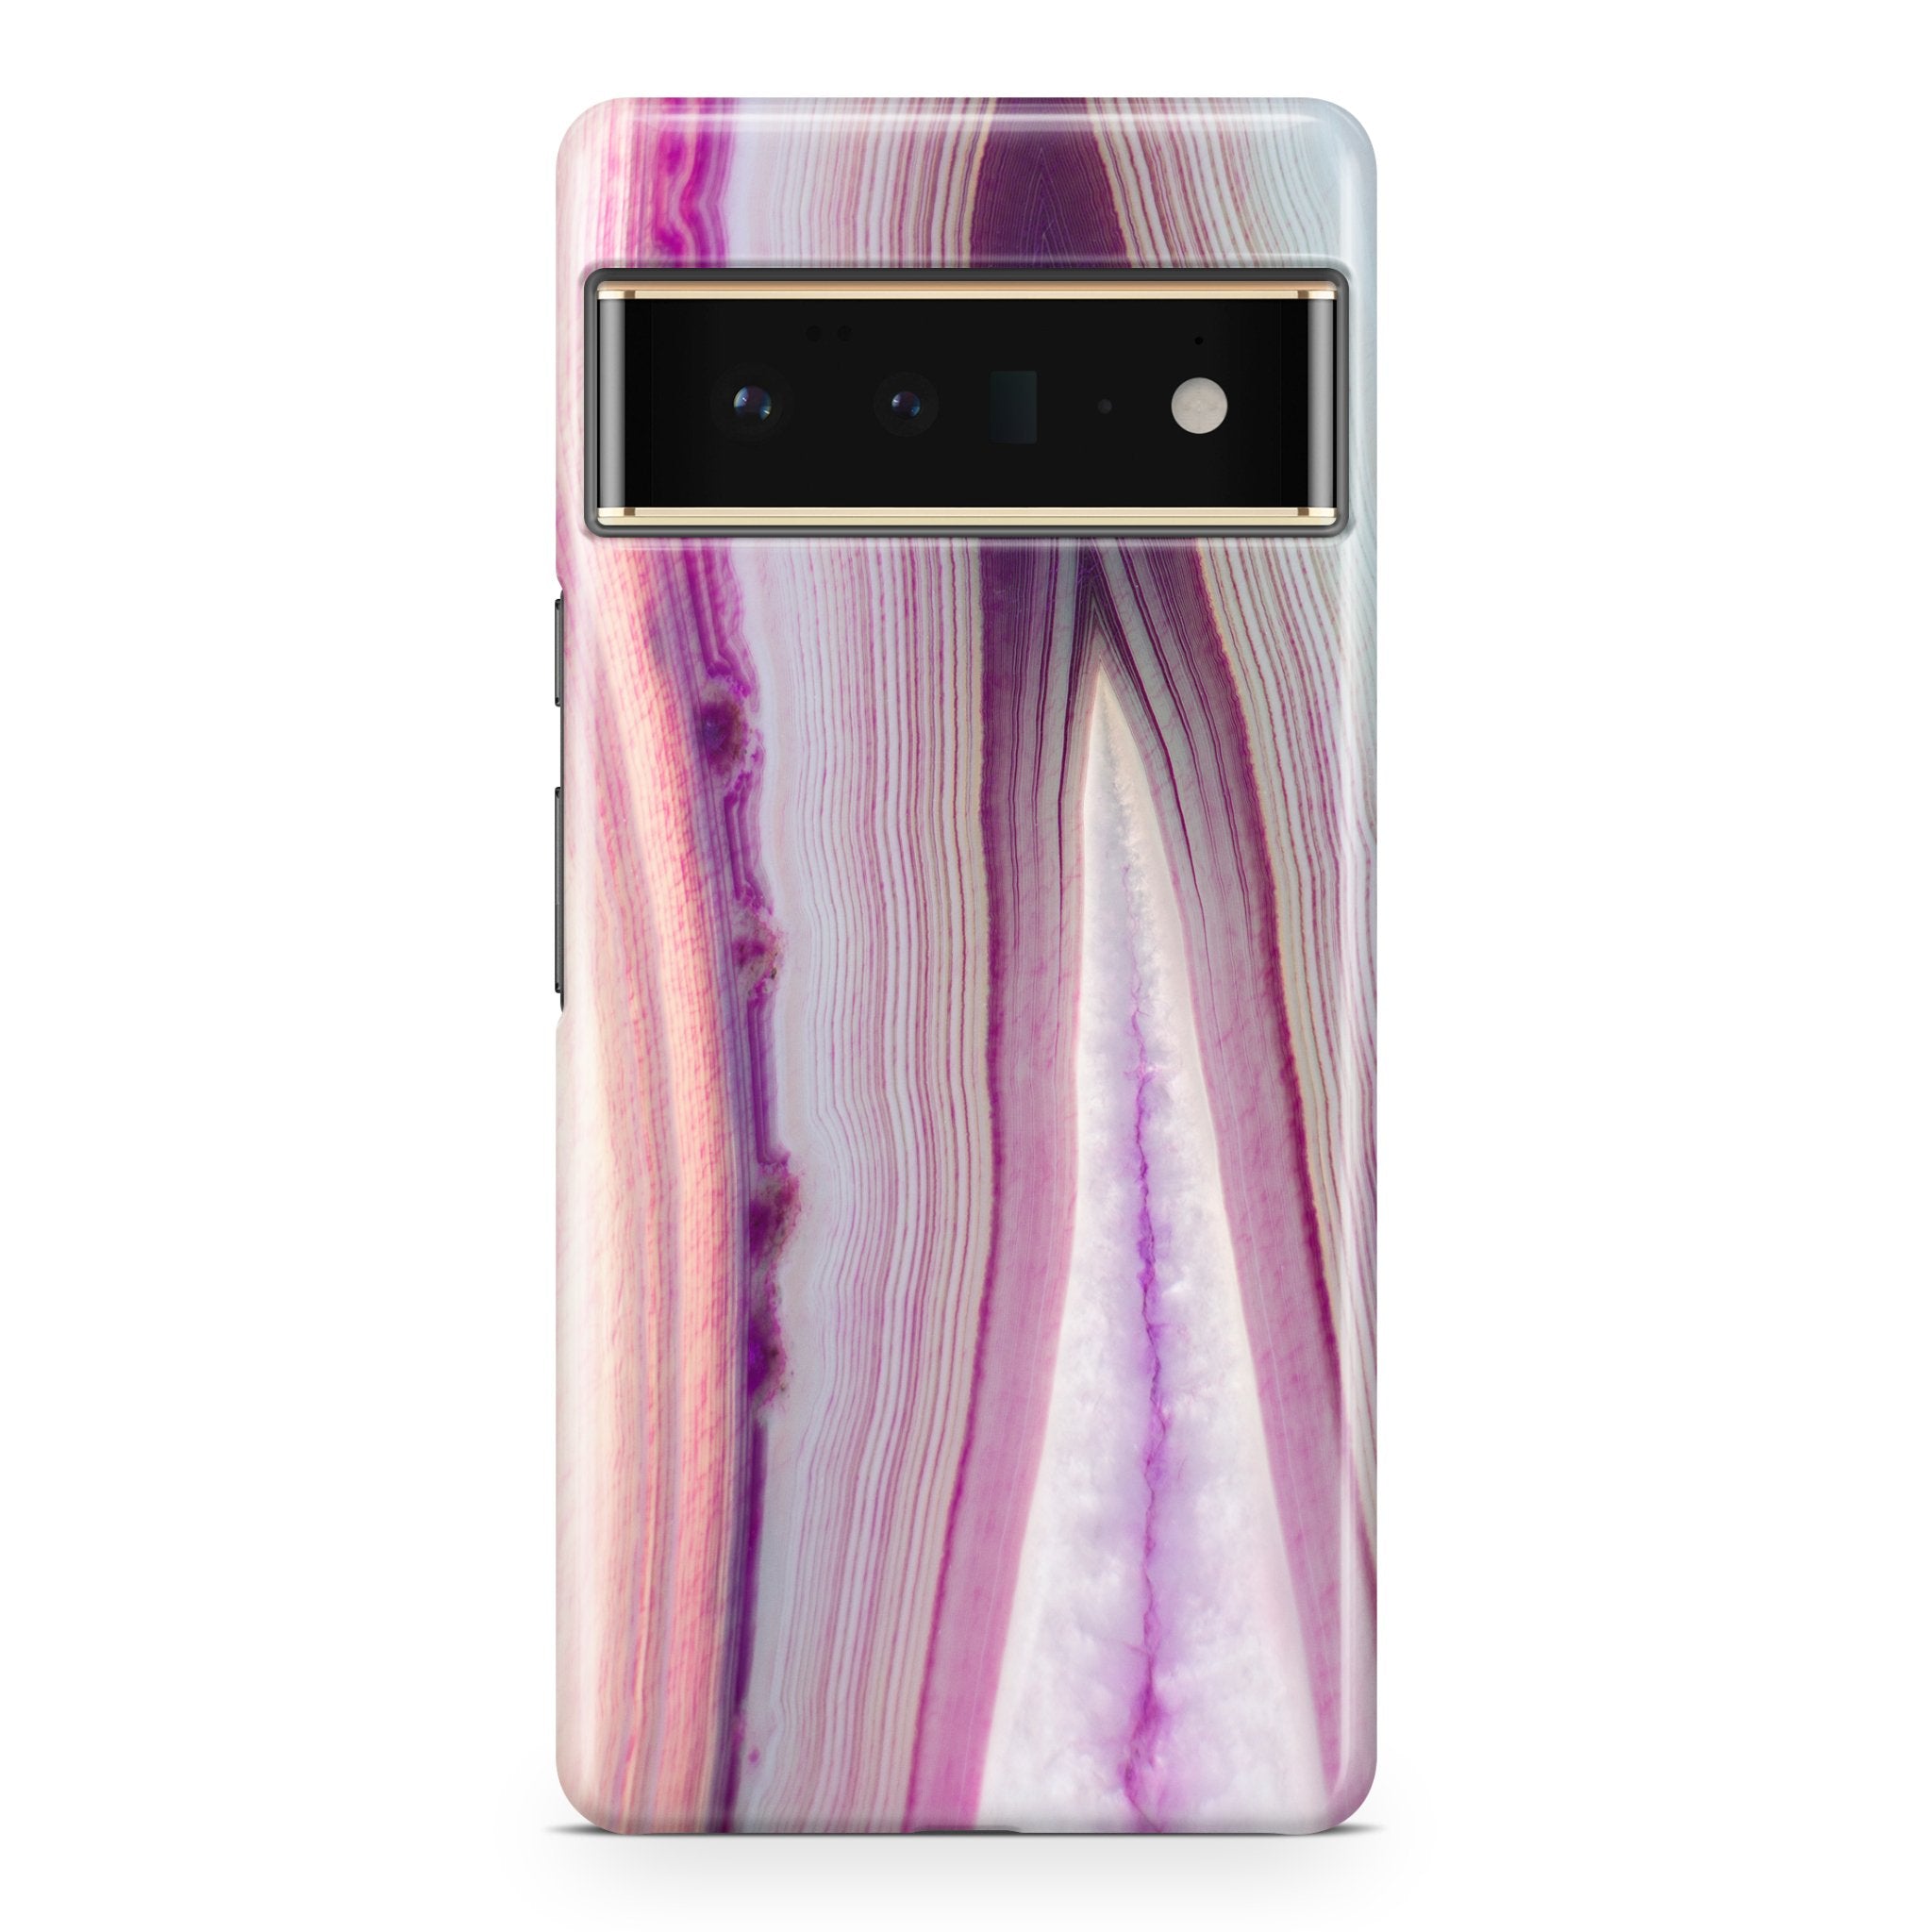 Grape Agate - Google phone case designs by CaseSwagger